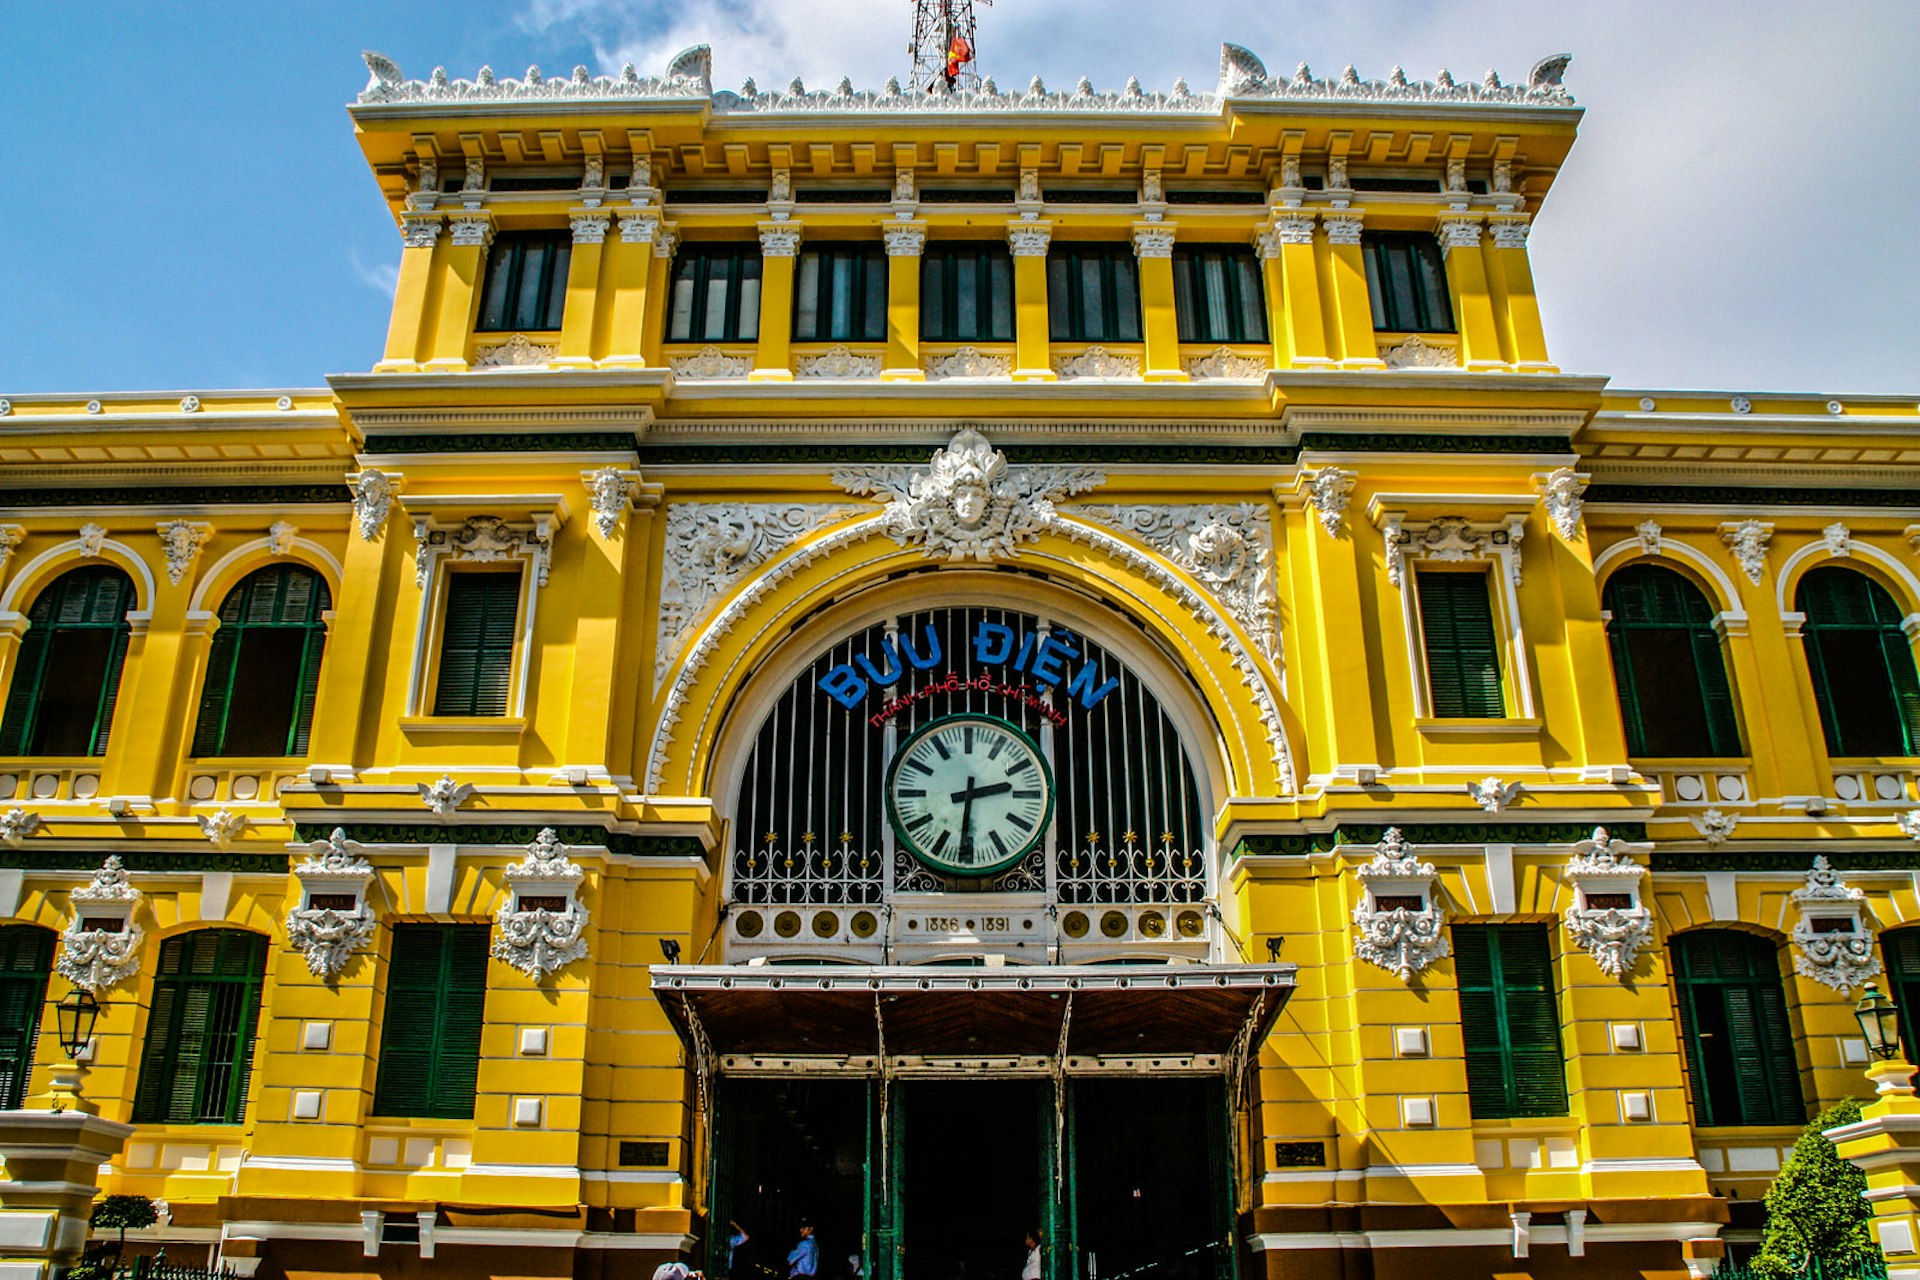 View of the yellow, ornate facade of the central post office building in Ho Chi Minh City